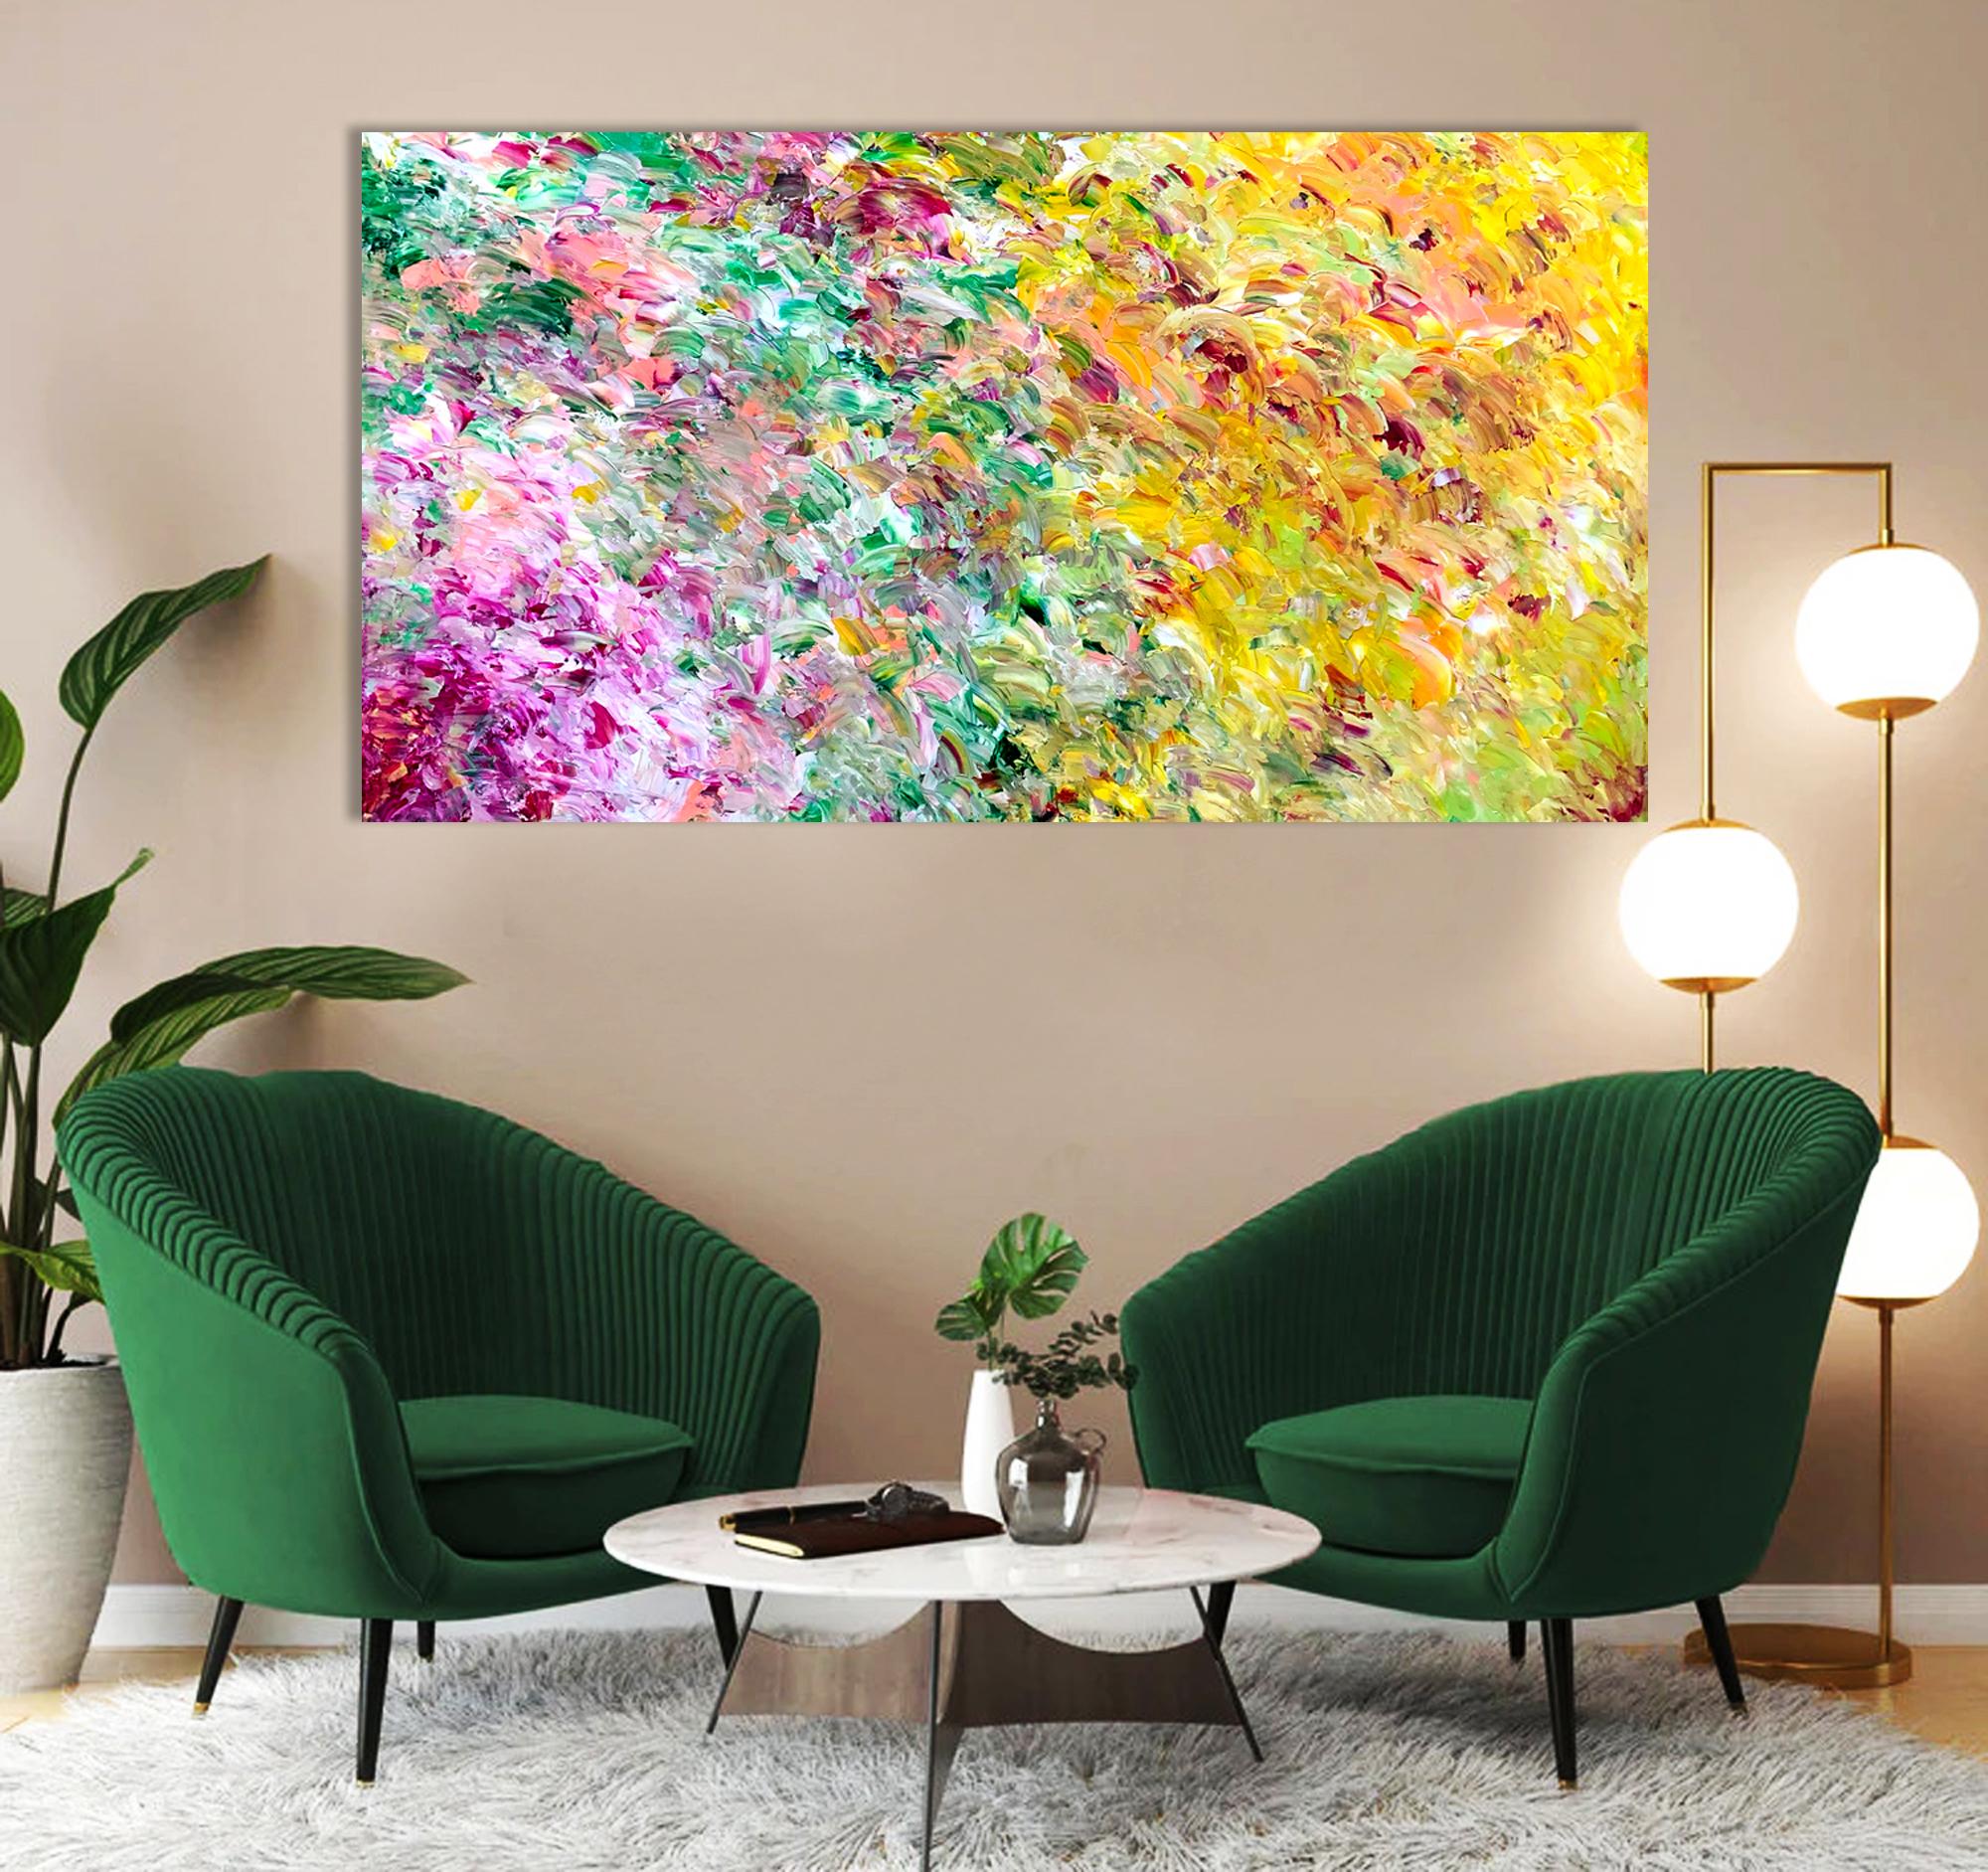 Floral Landscape - Abstract Expressionist Painting by Estelle Asmodelle